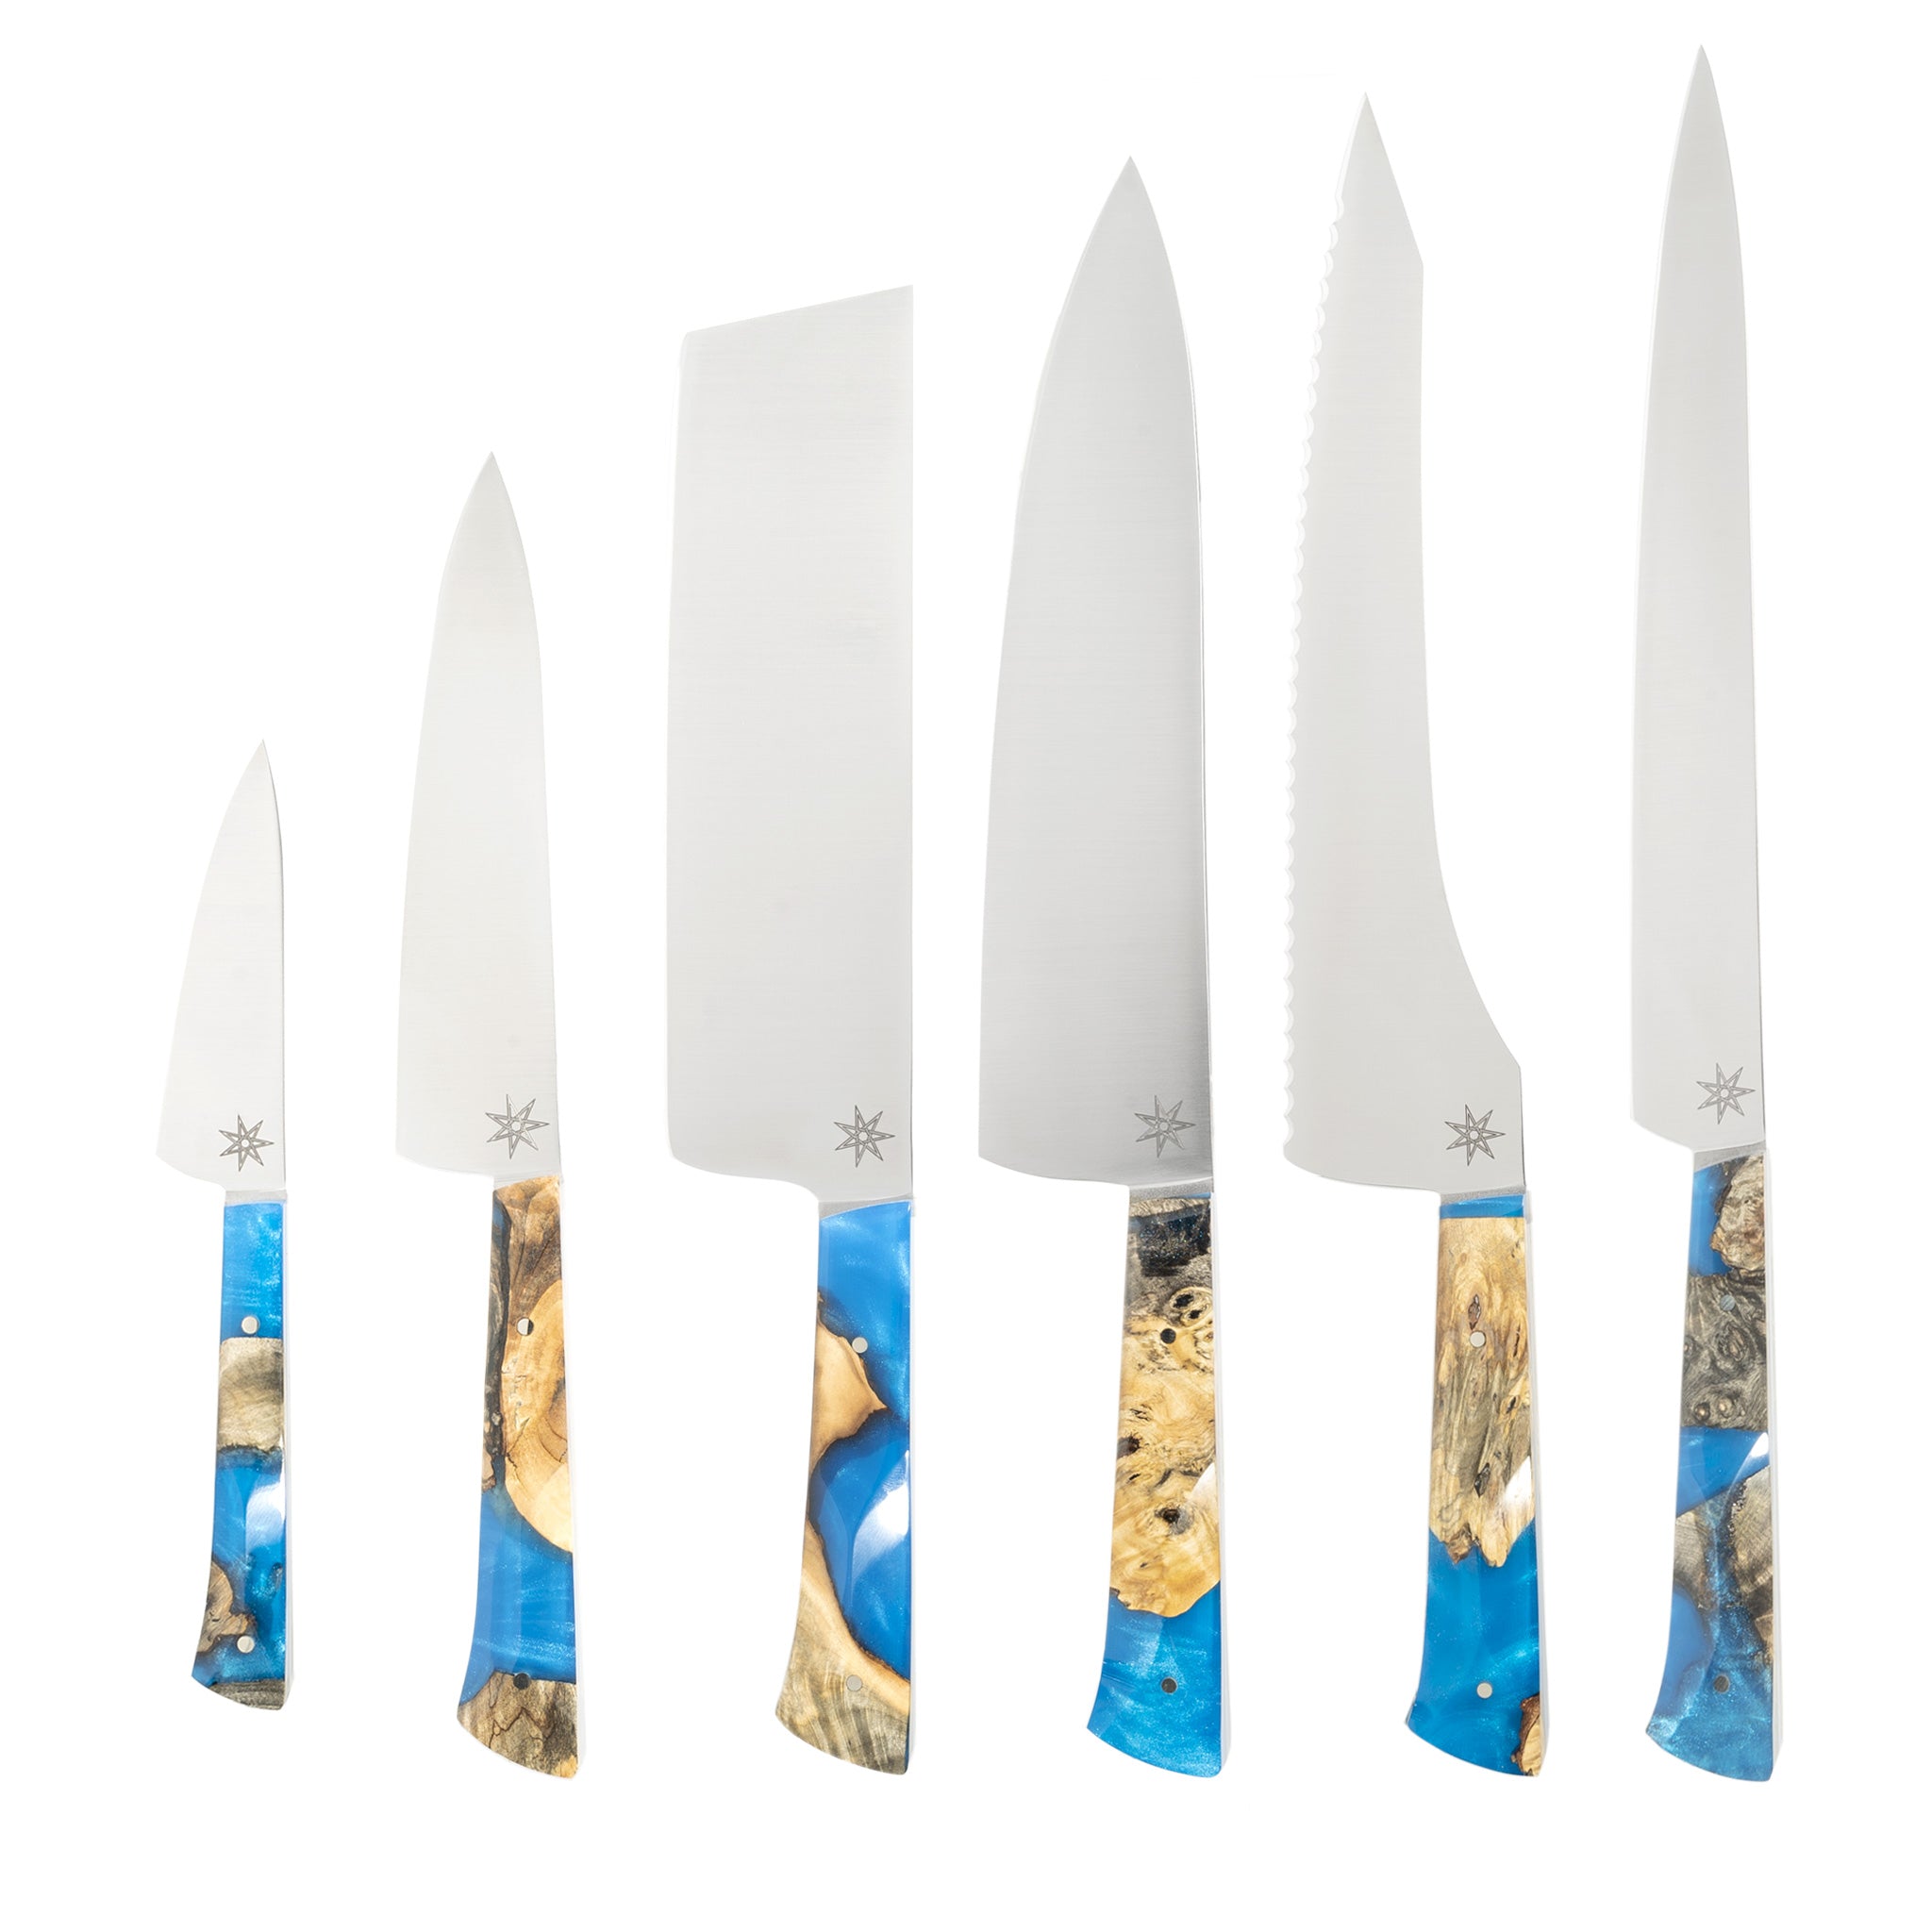 Town Cutler Tahoe Bliss Knife Set of 6 Knives